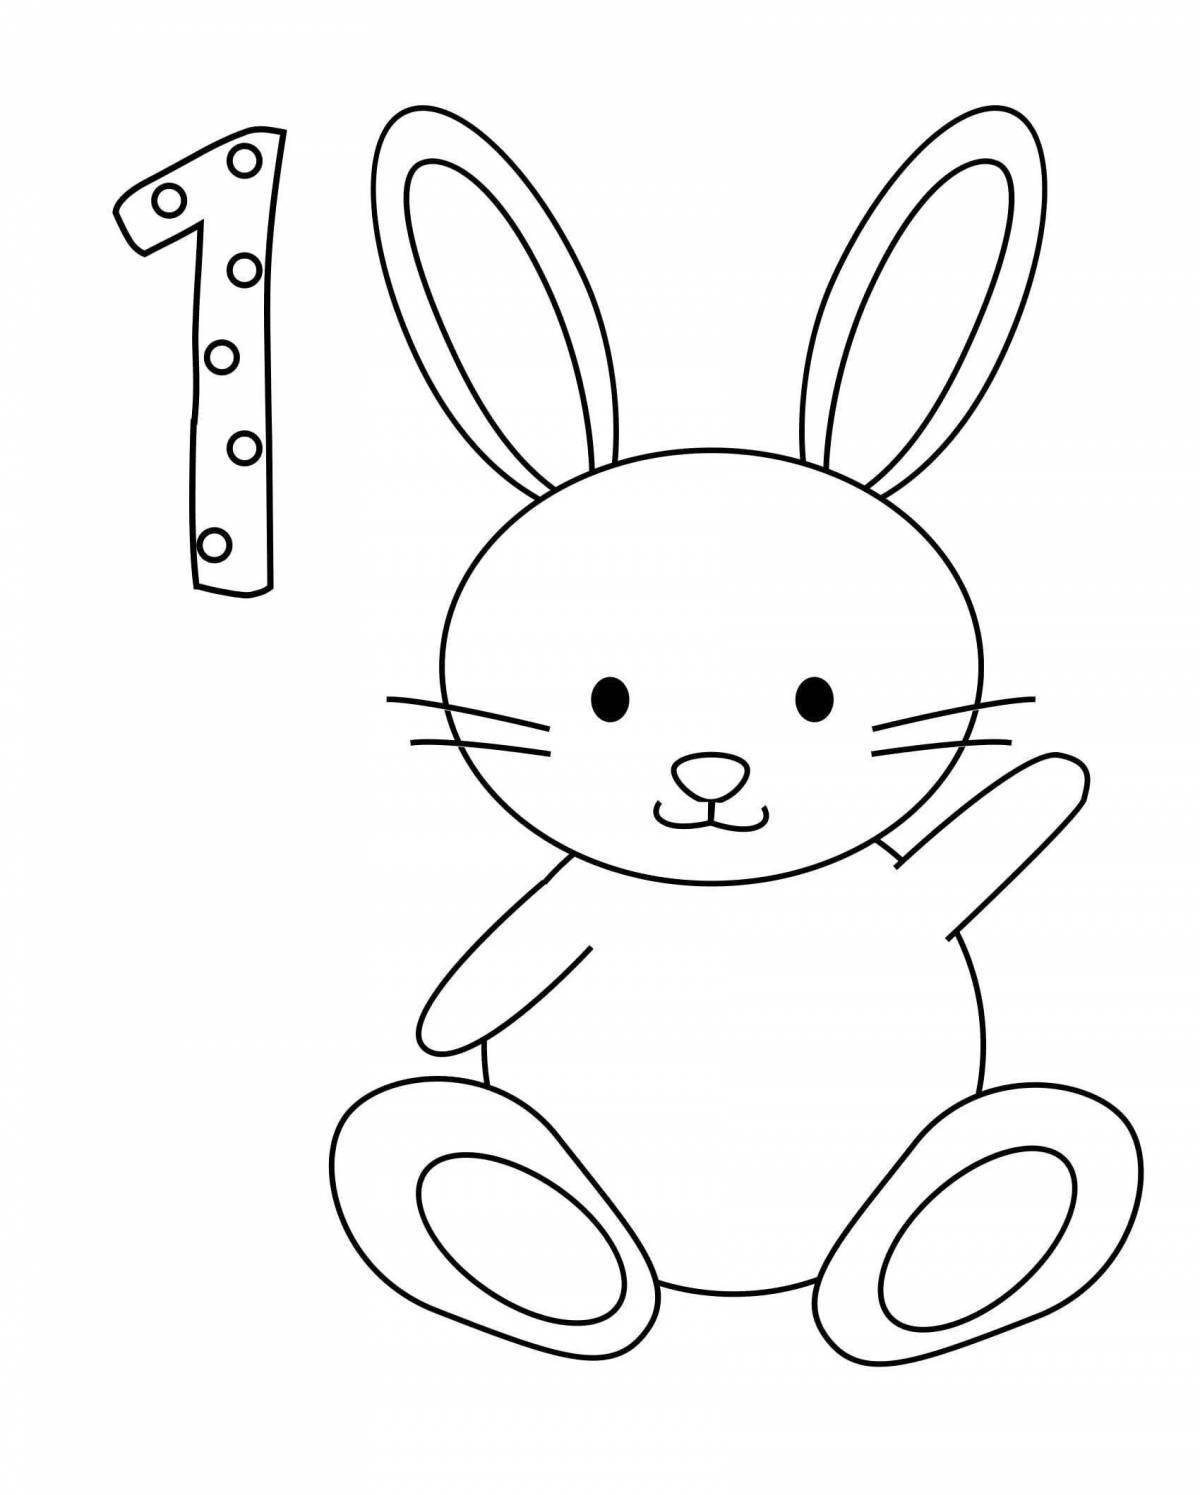 Cute bunny drawing for kids